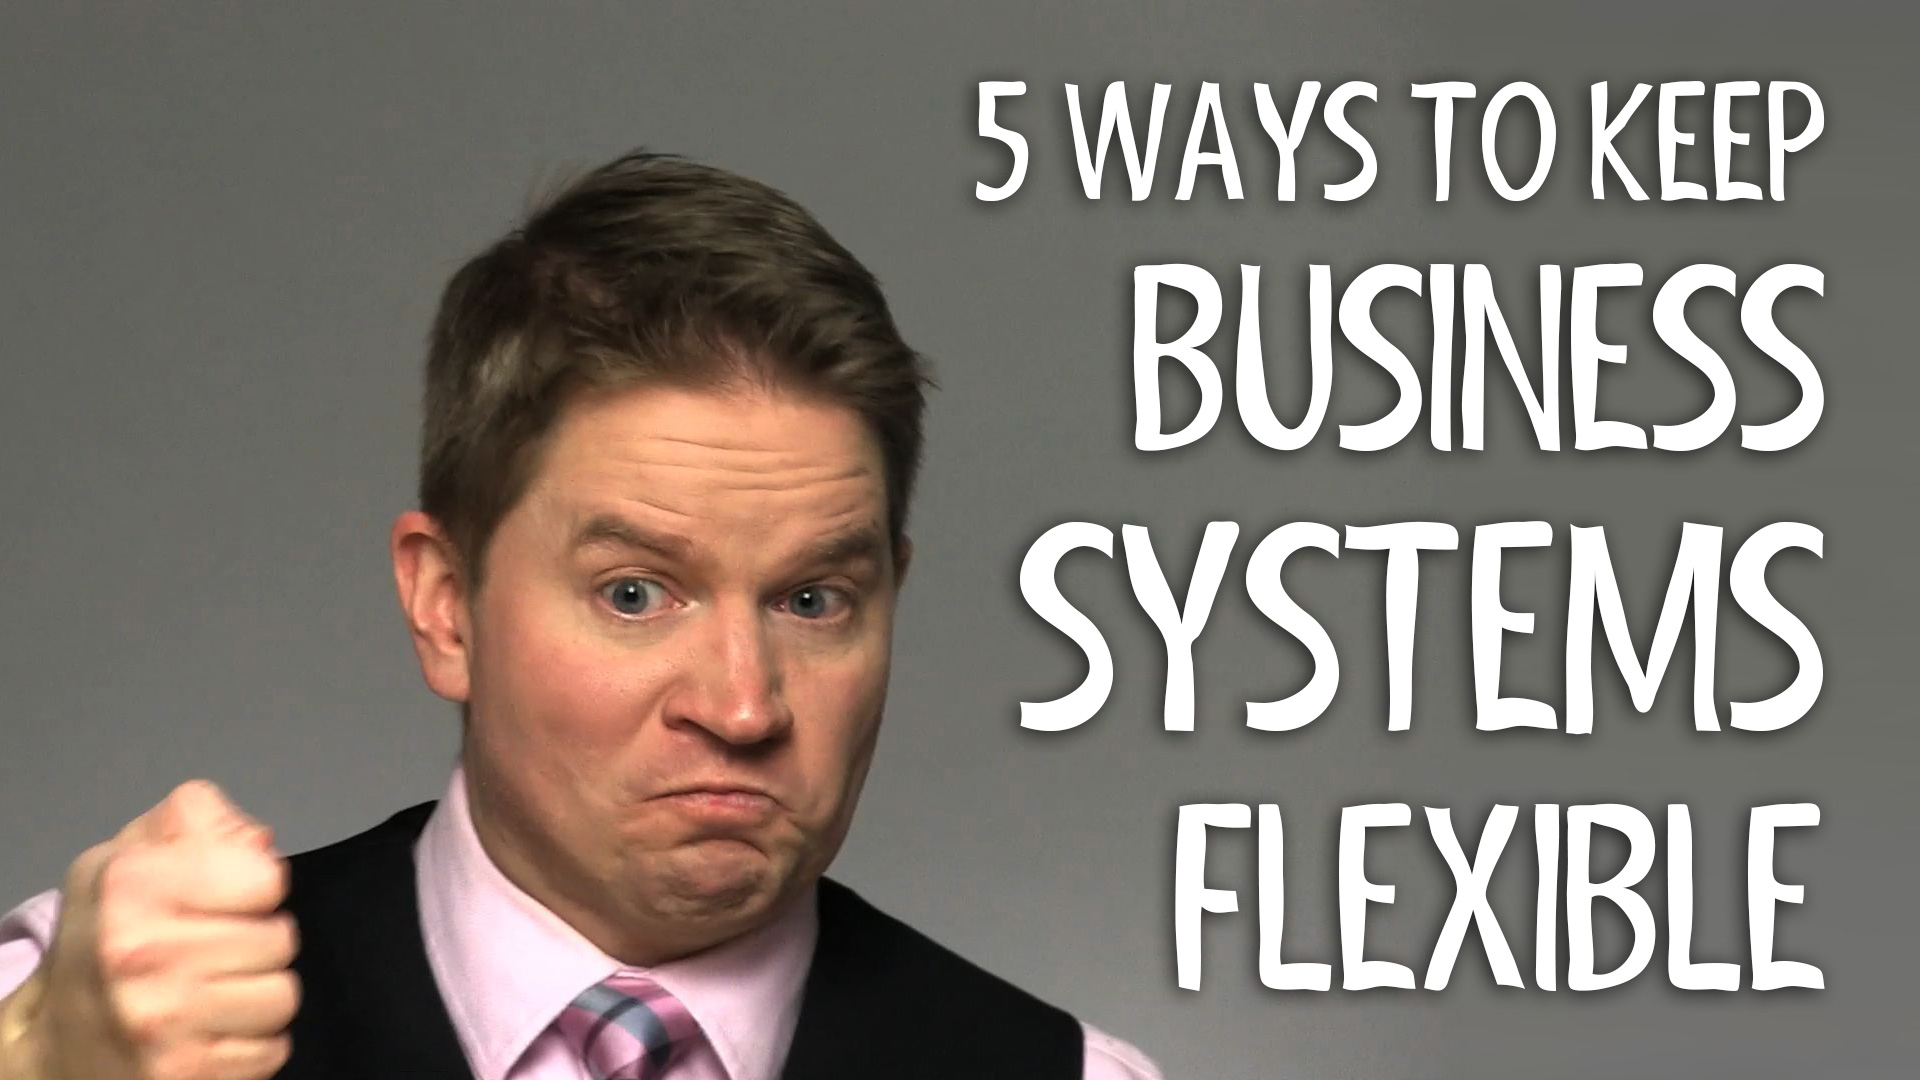 5 Ways to Keep Business Systems Flexible